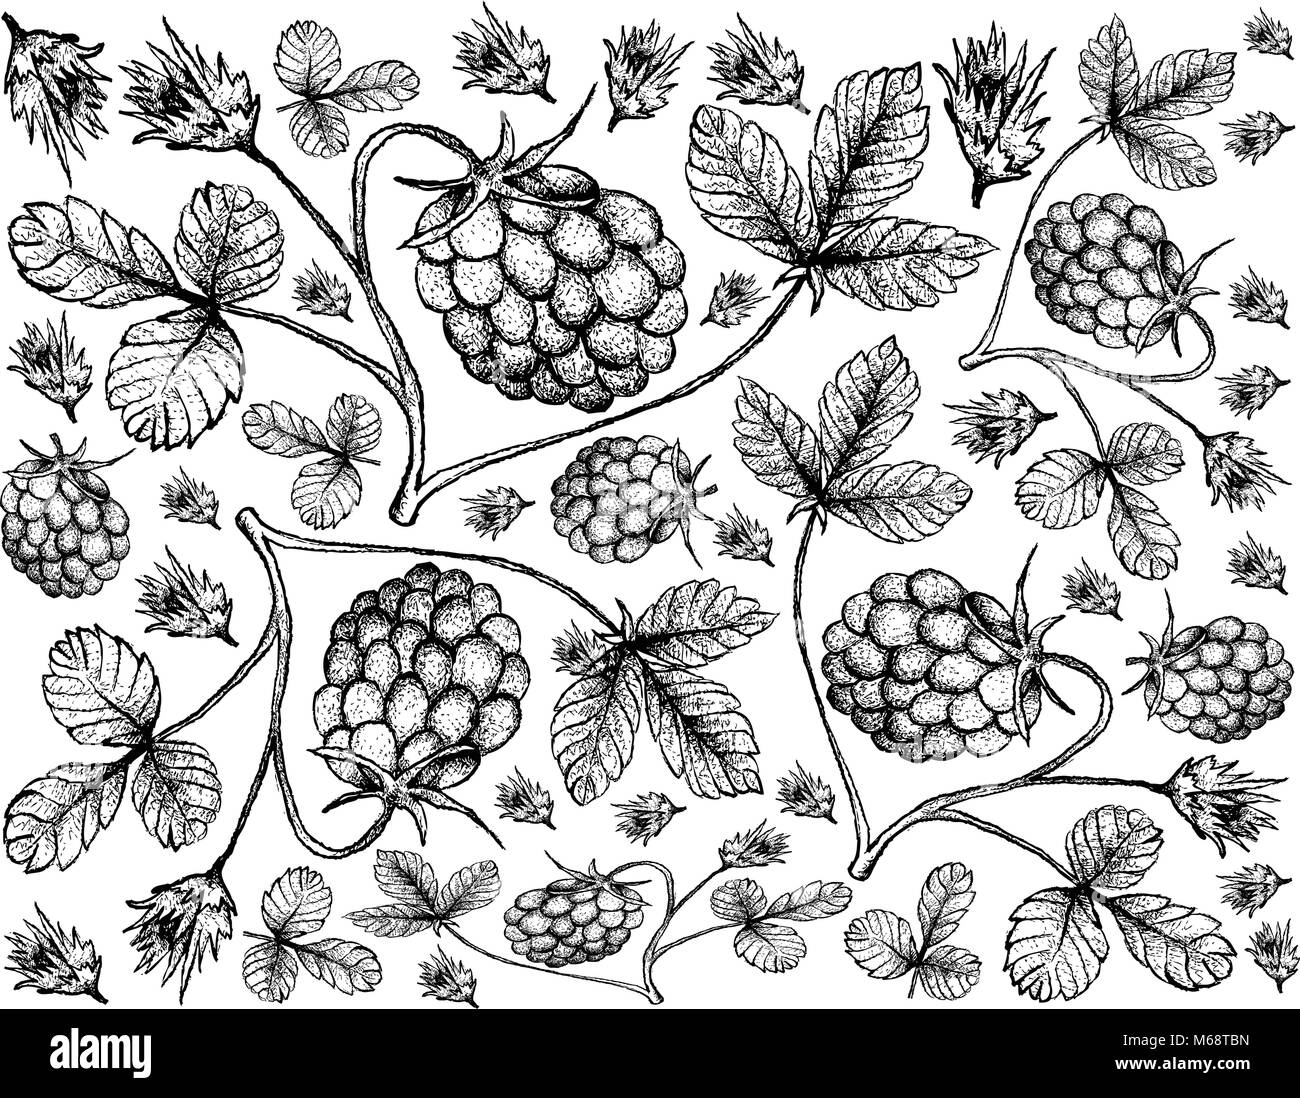 Berry Fruit, Illustration Wallpaper Background of Hand Drawn Sketch of Fresh Arctic Bramble, Arctic Raspberry or Rubus Arcticus Fruits. Stock Vector